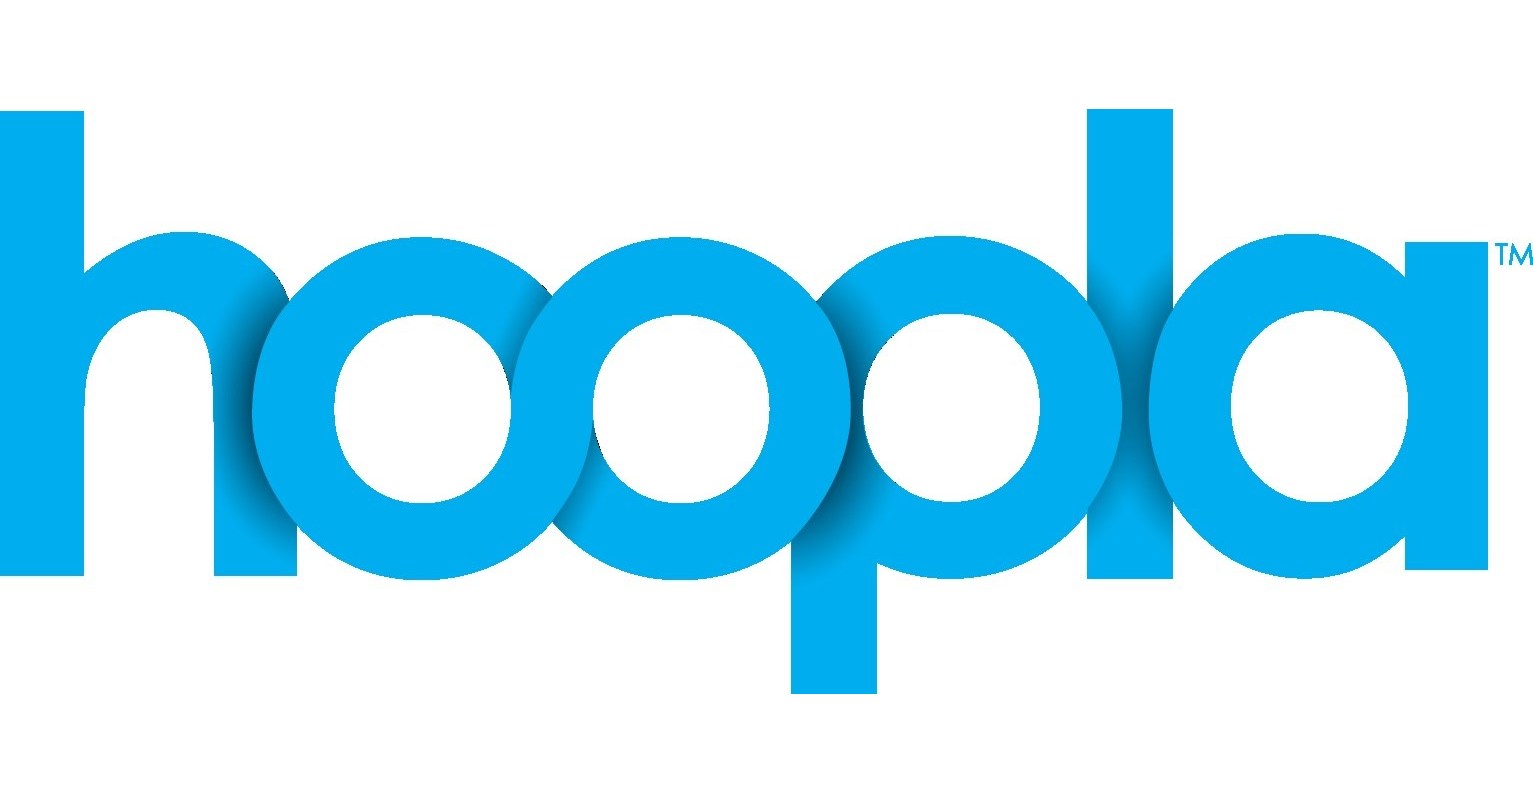 Hoopla Digital Account, web and mobile library media streaming platform for audio books, comics, e-books, movies, music, and TV